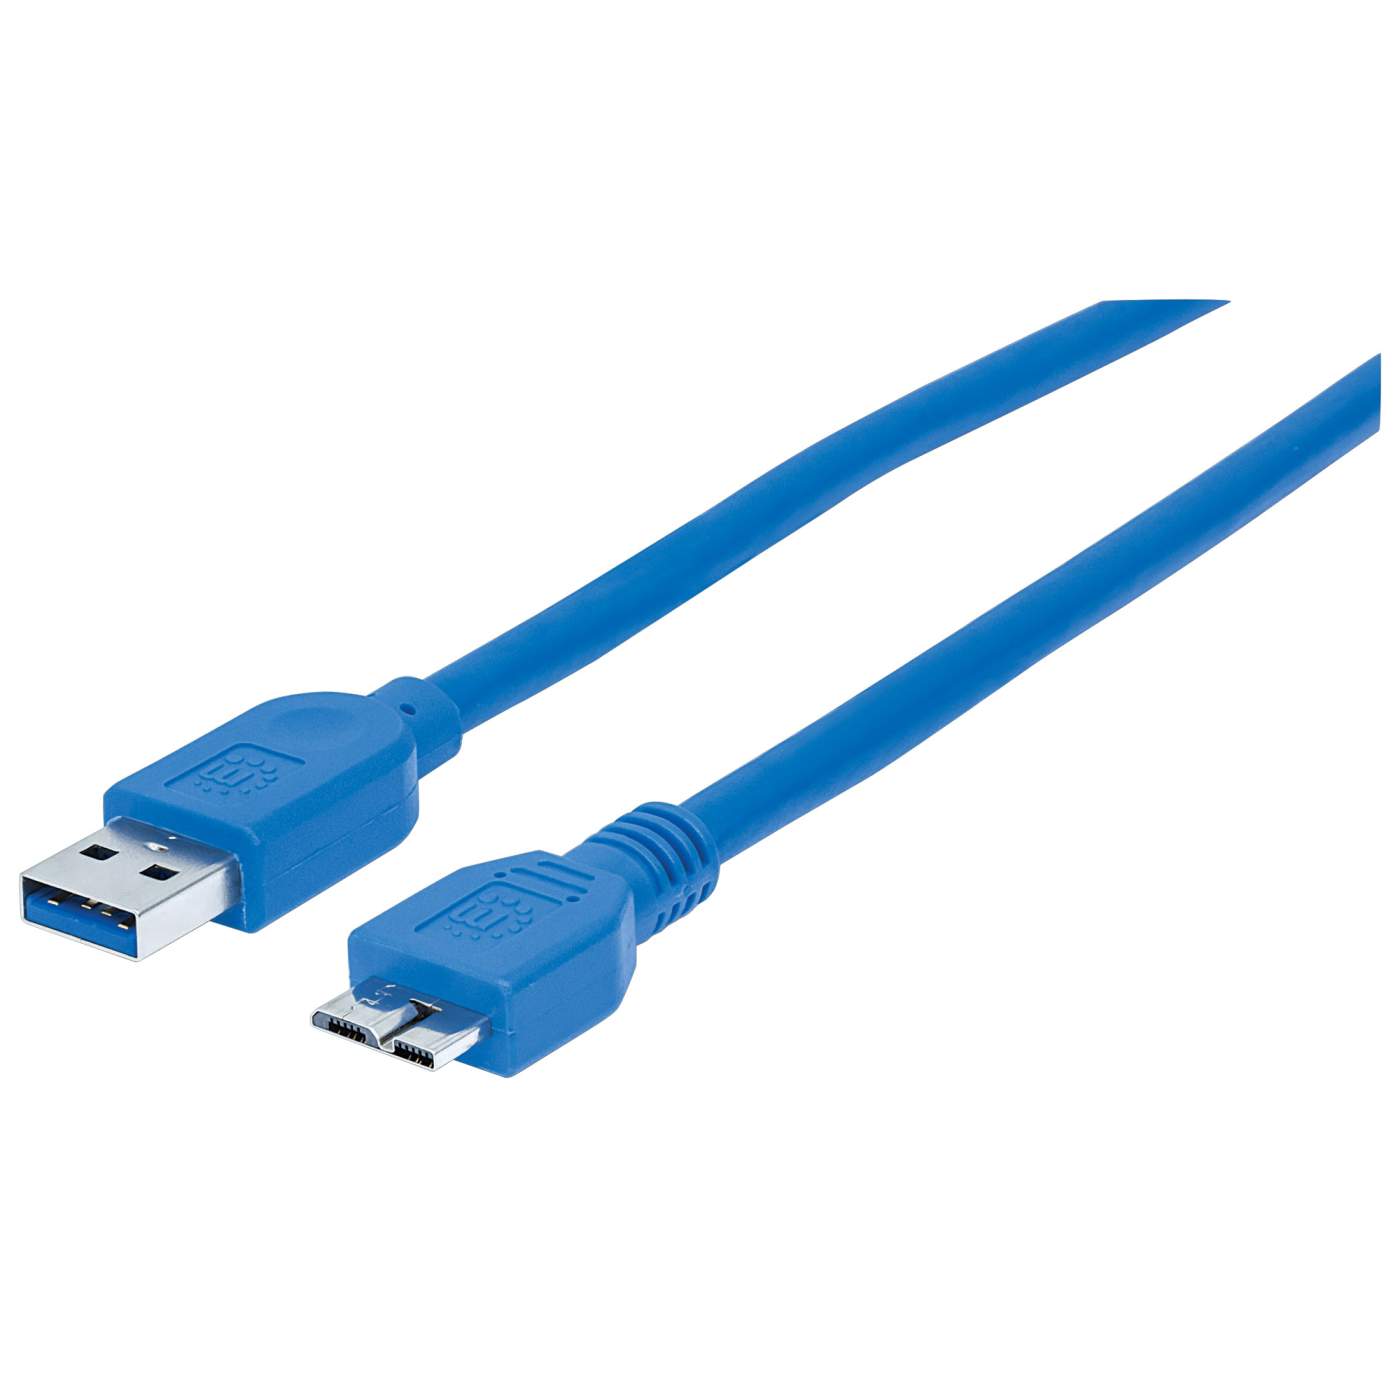 0.5m 1.5ft Black USB 3.0 Micro B Cable - USB 3.0 Cables